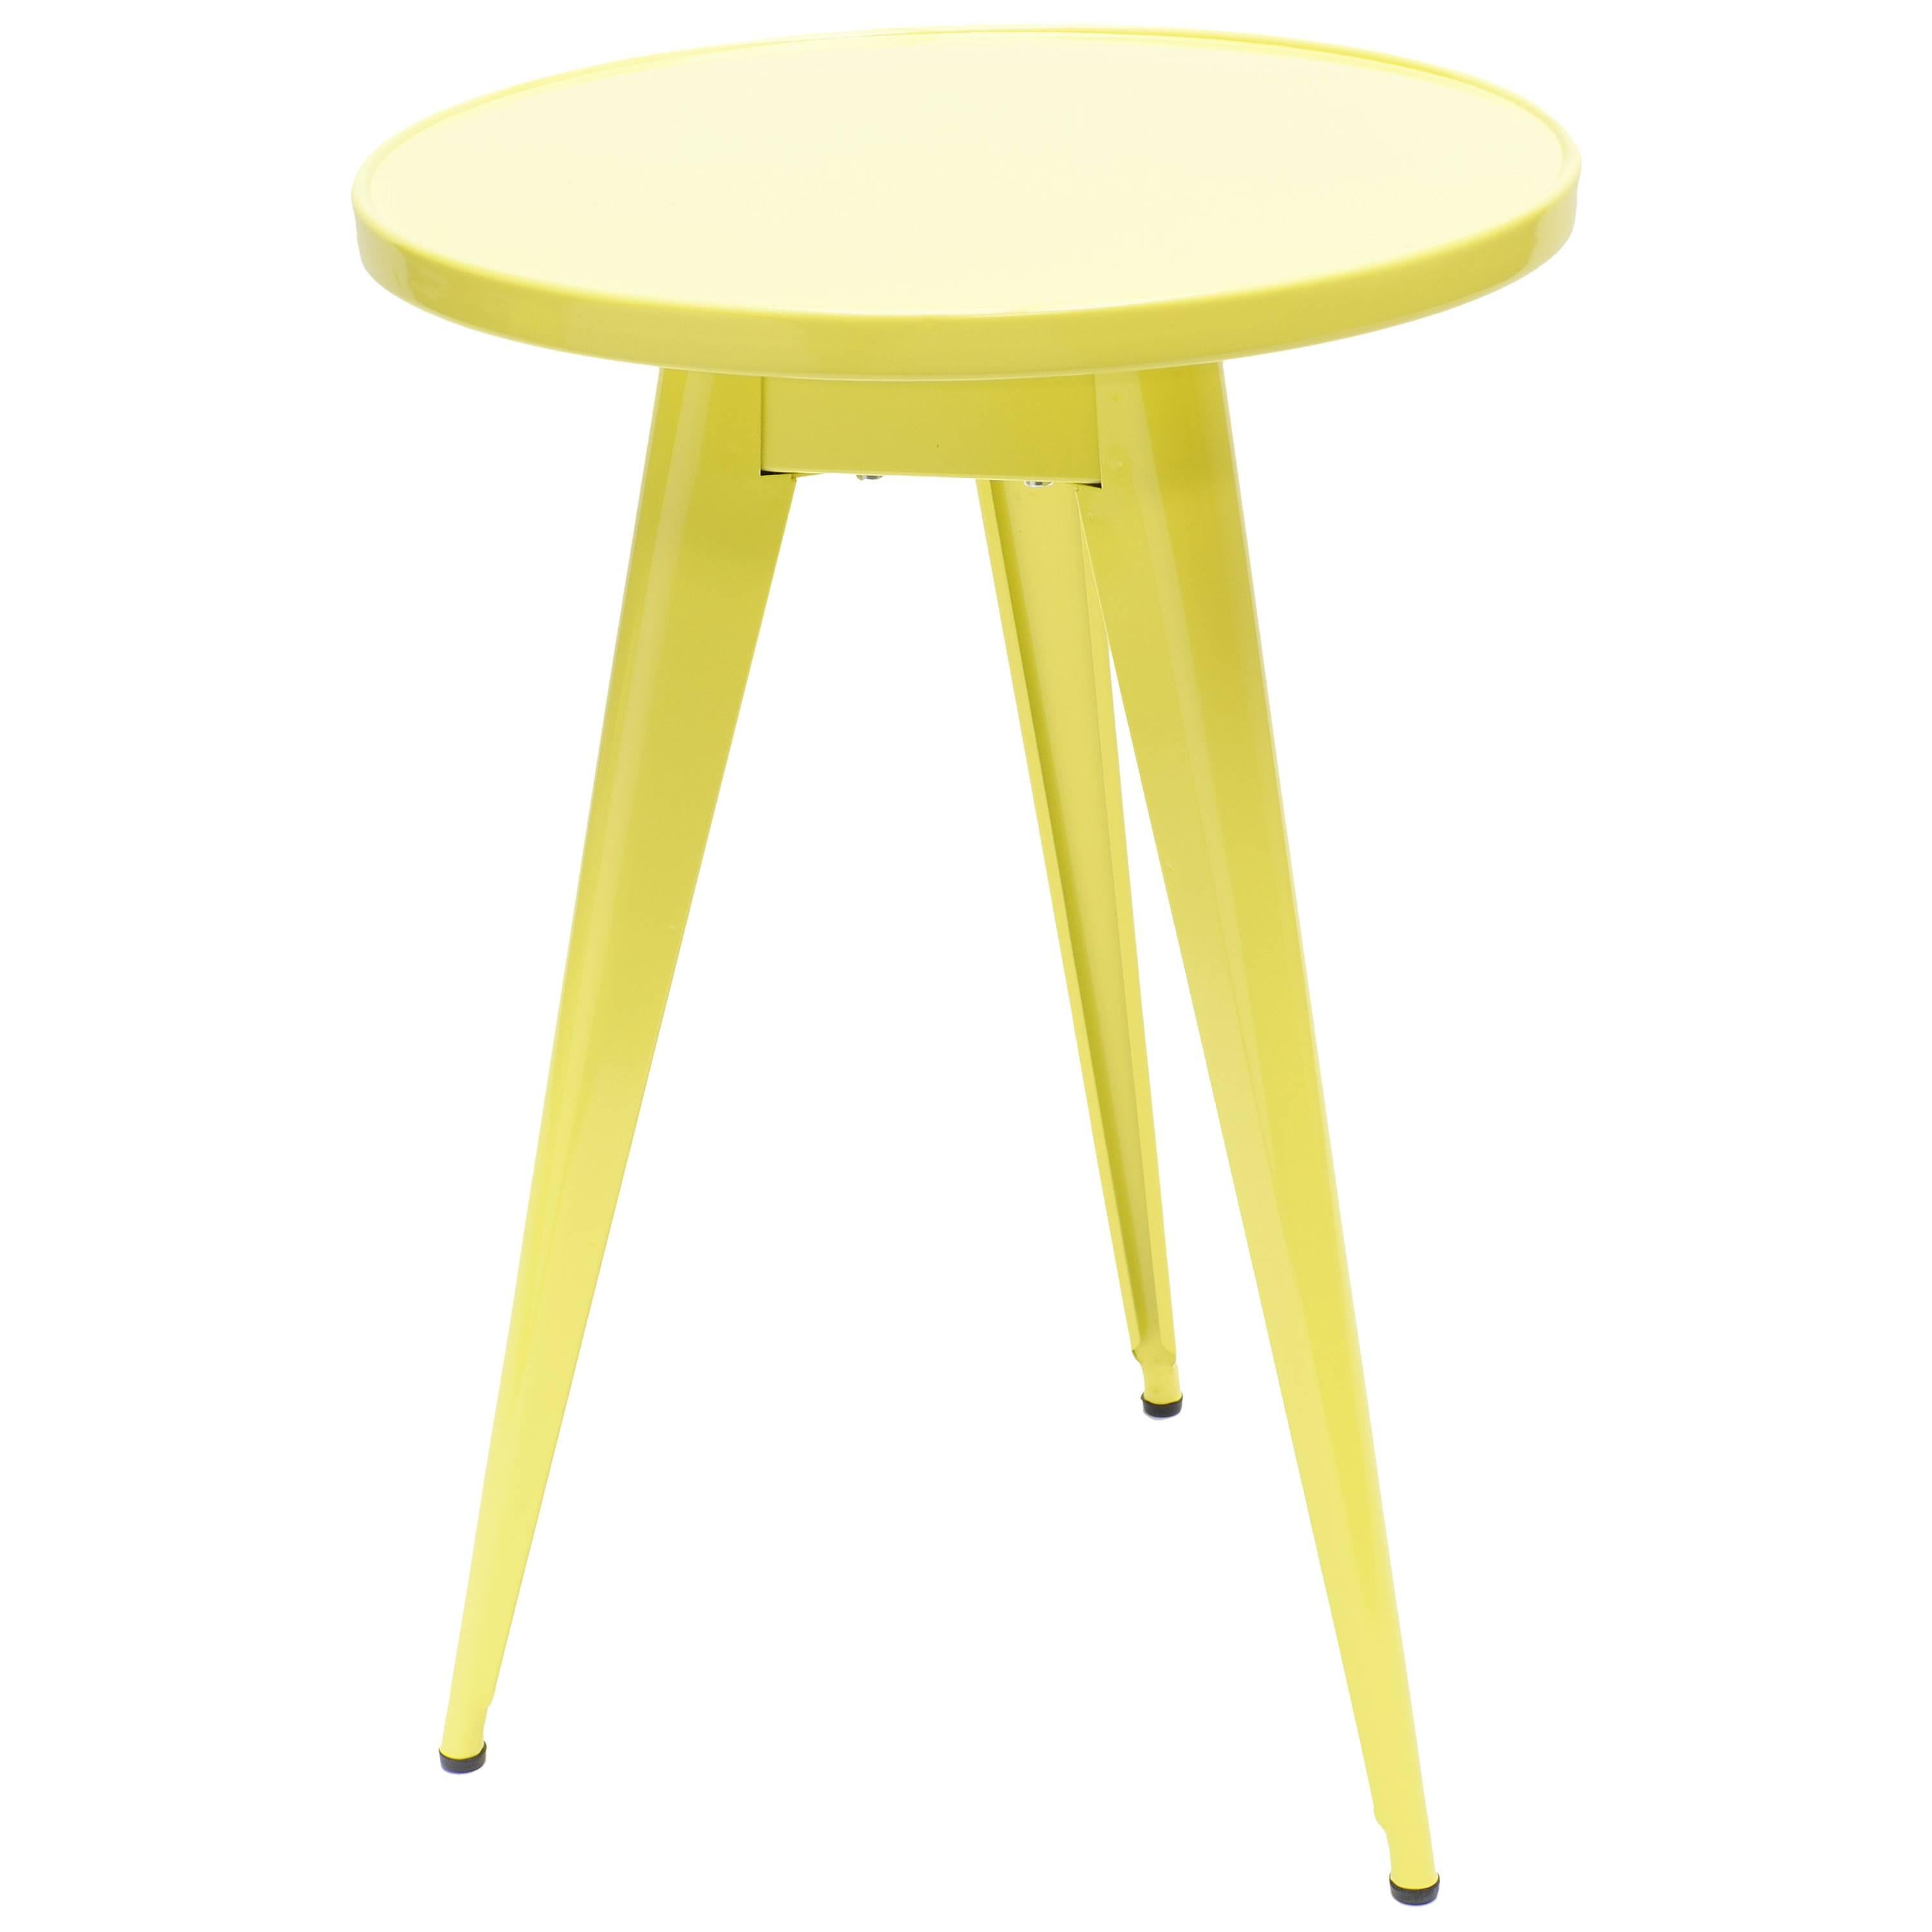 55 Round Pedestal Table in Pastel Yellow by Jean Pauchard & Tolix For Sale